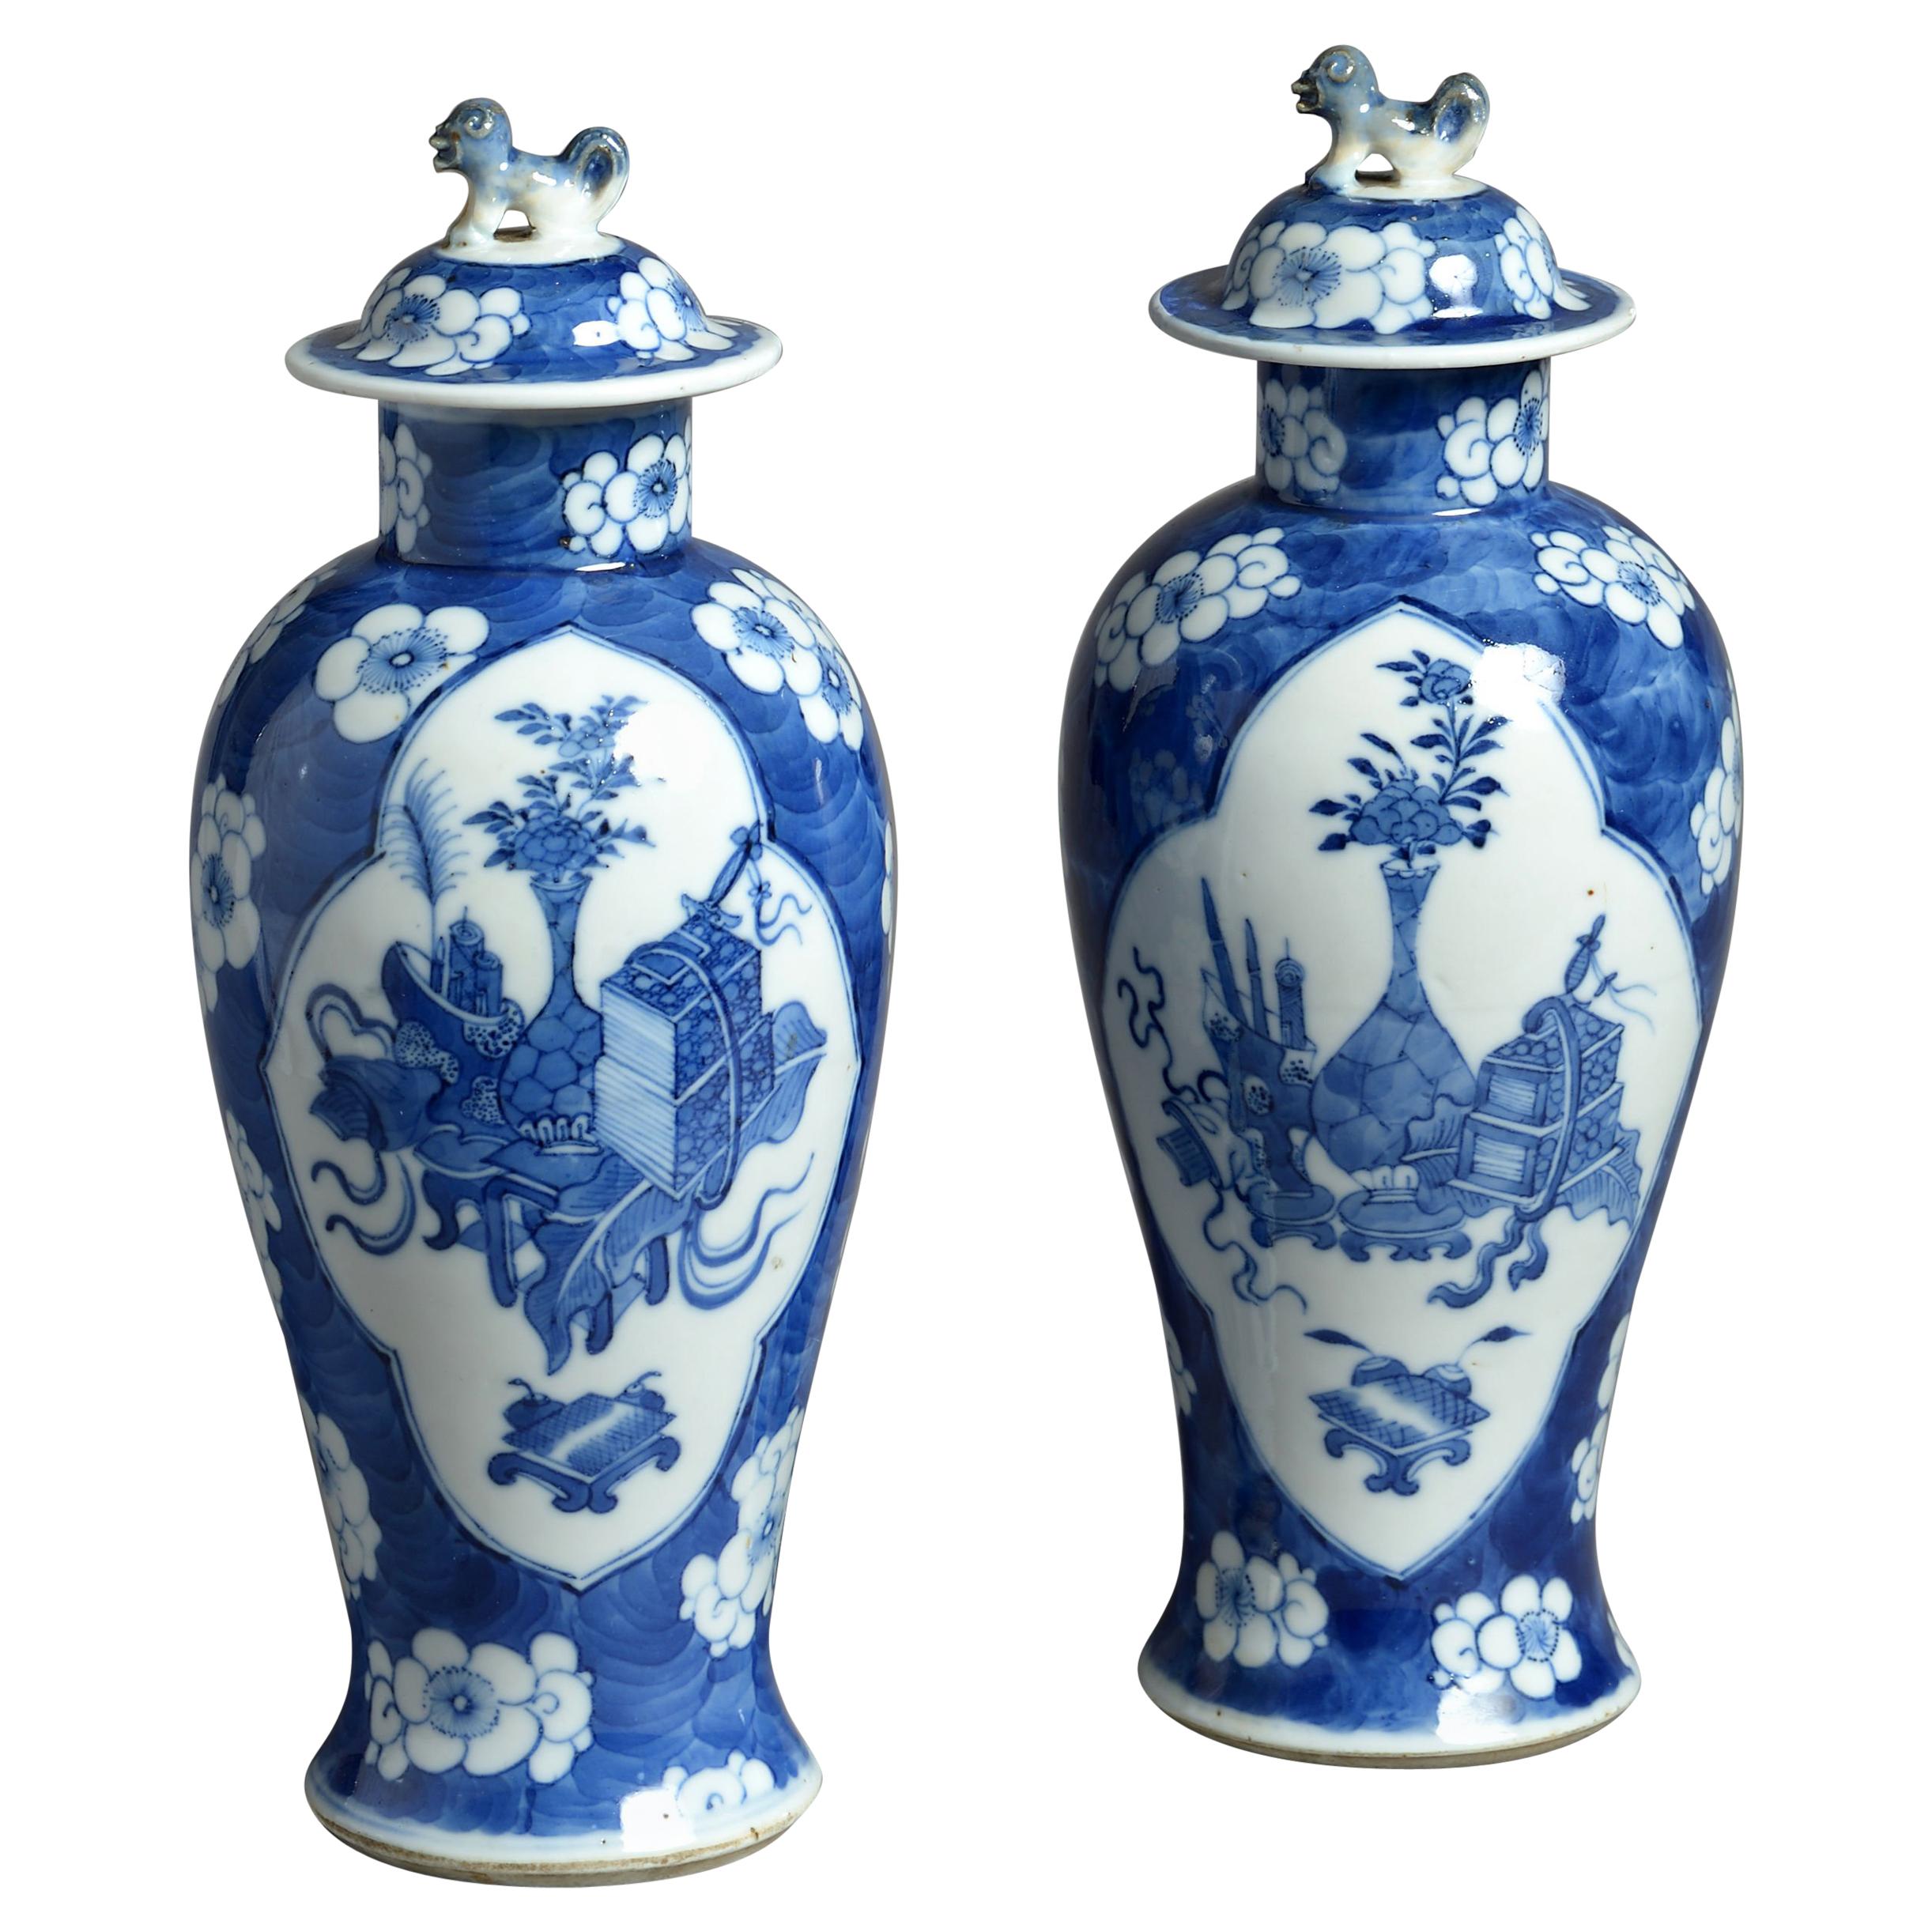 19th Century Pair of Blue and White Porcelain Vases